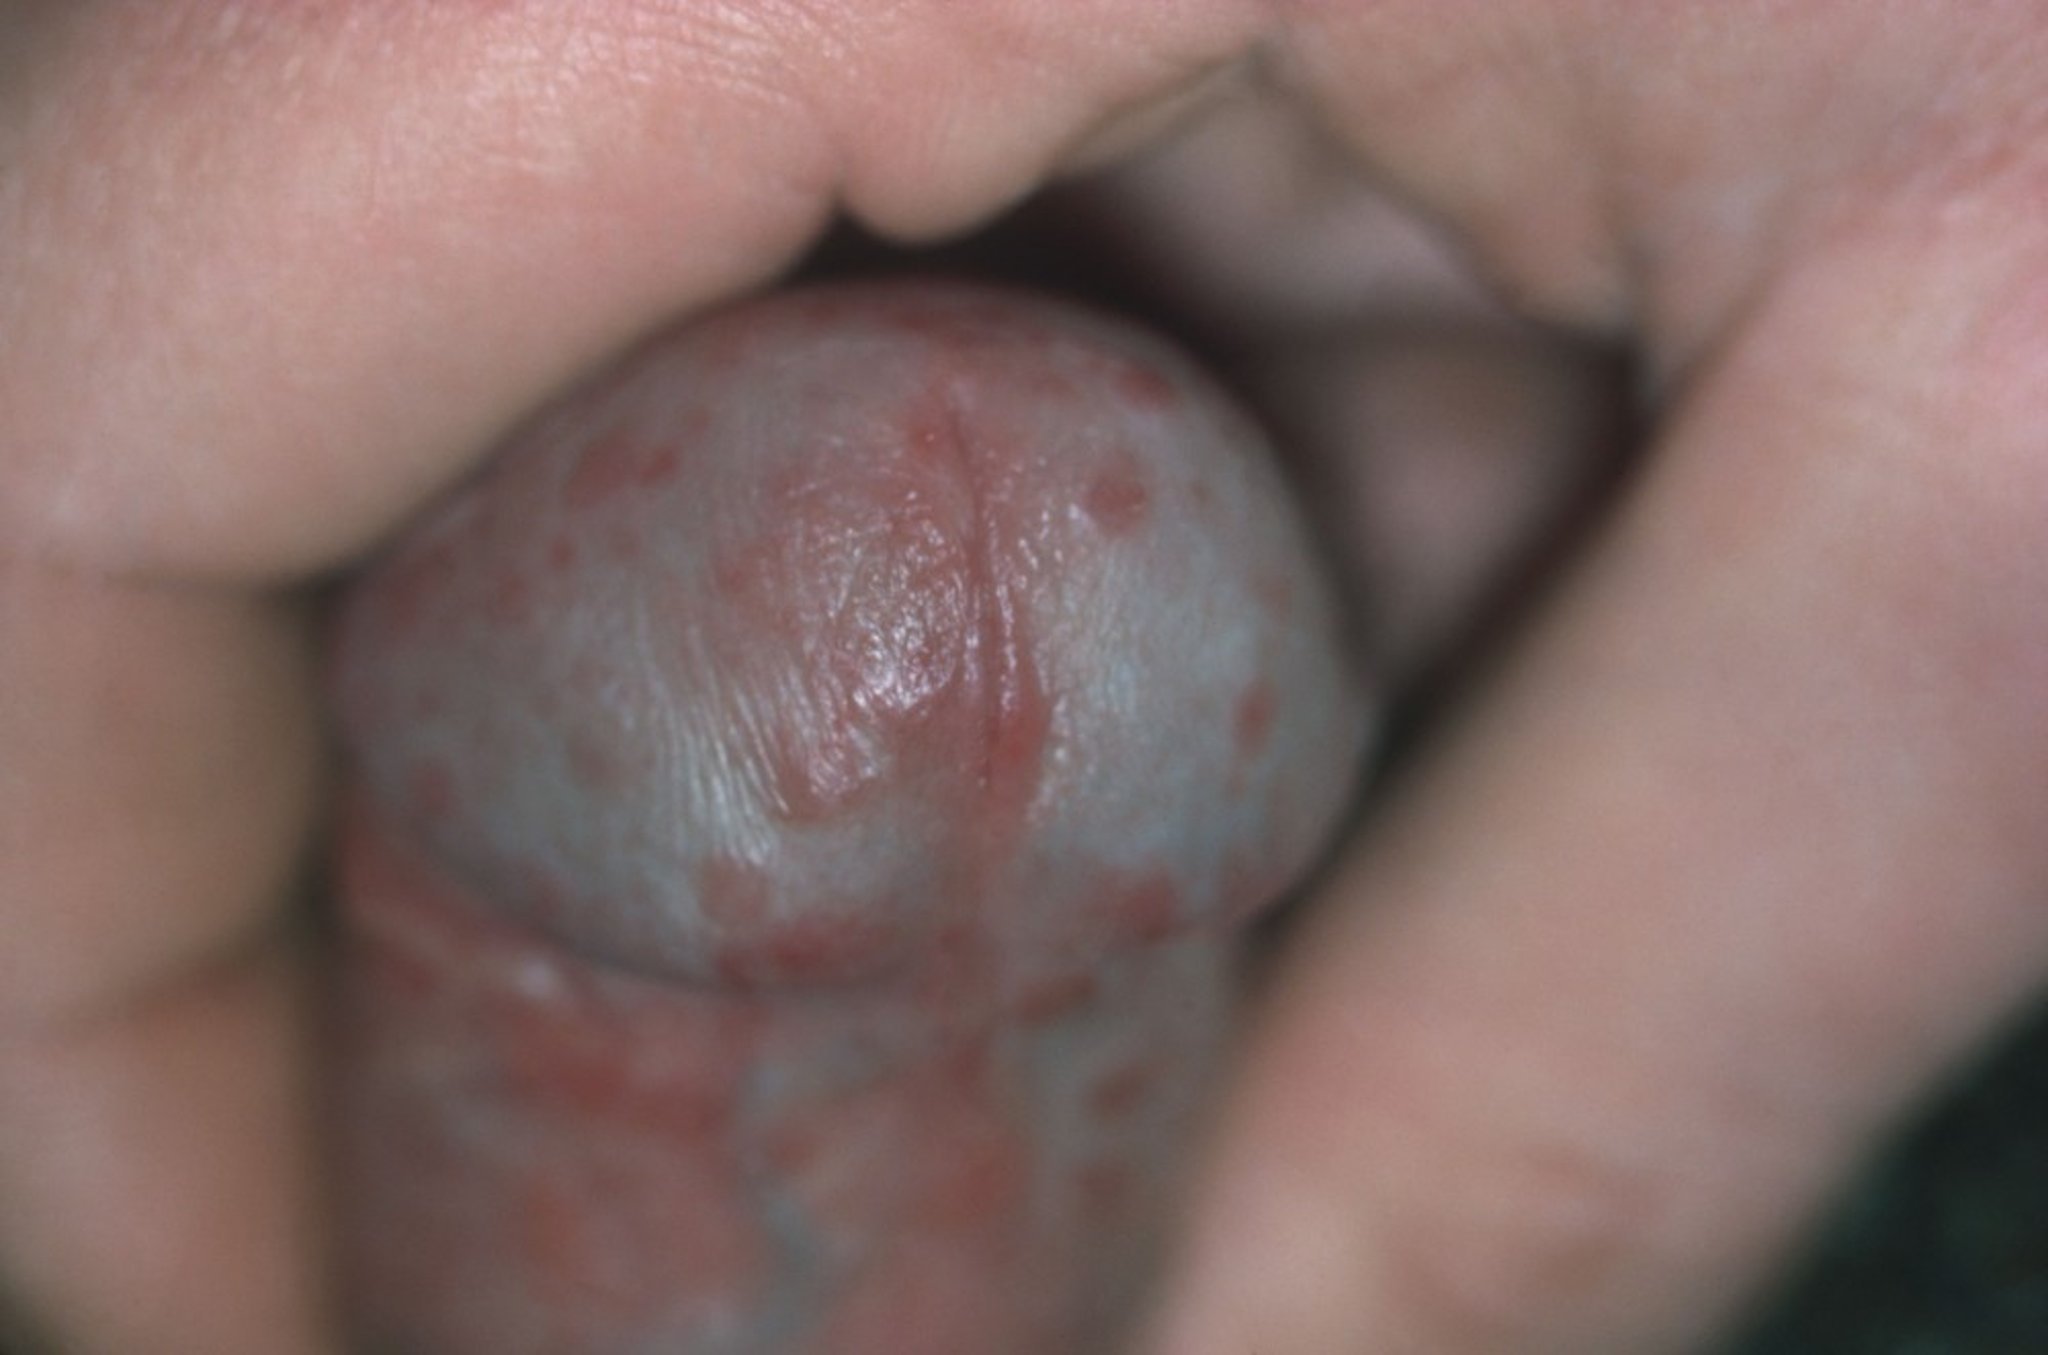 Penile Squamous Cell Carcinoma in Situ (Formerly Bowen Disease)